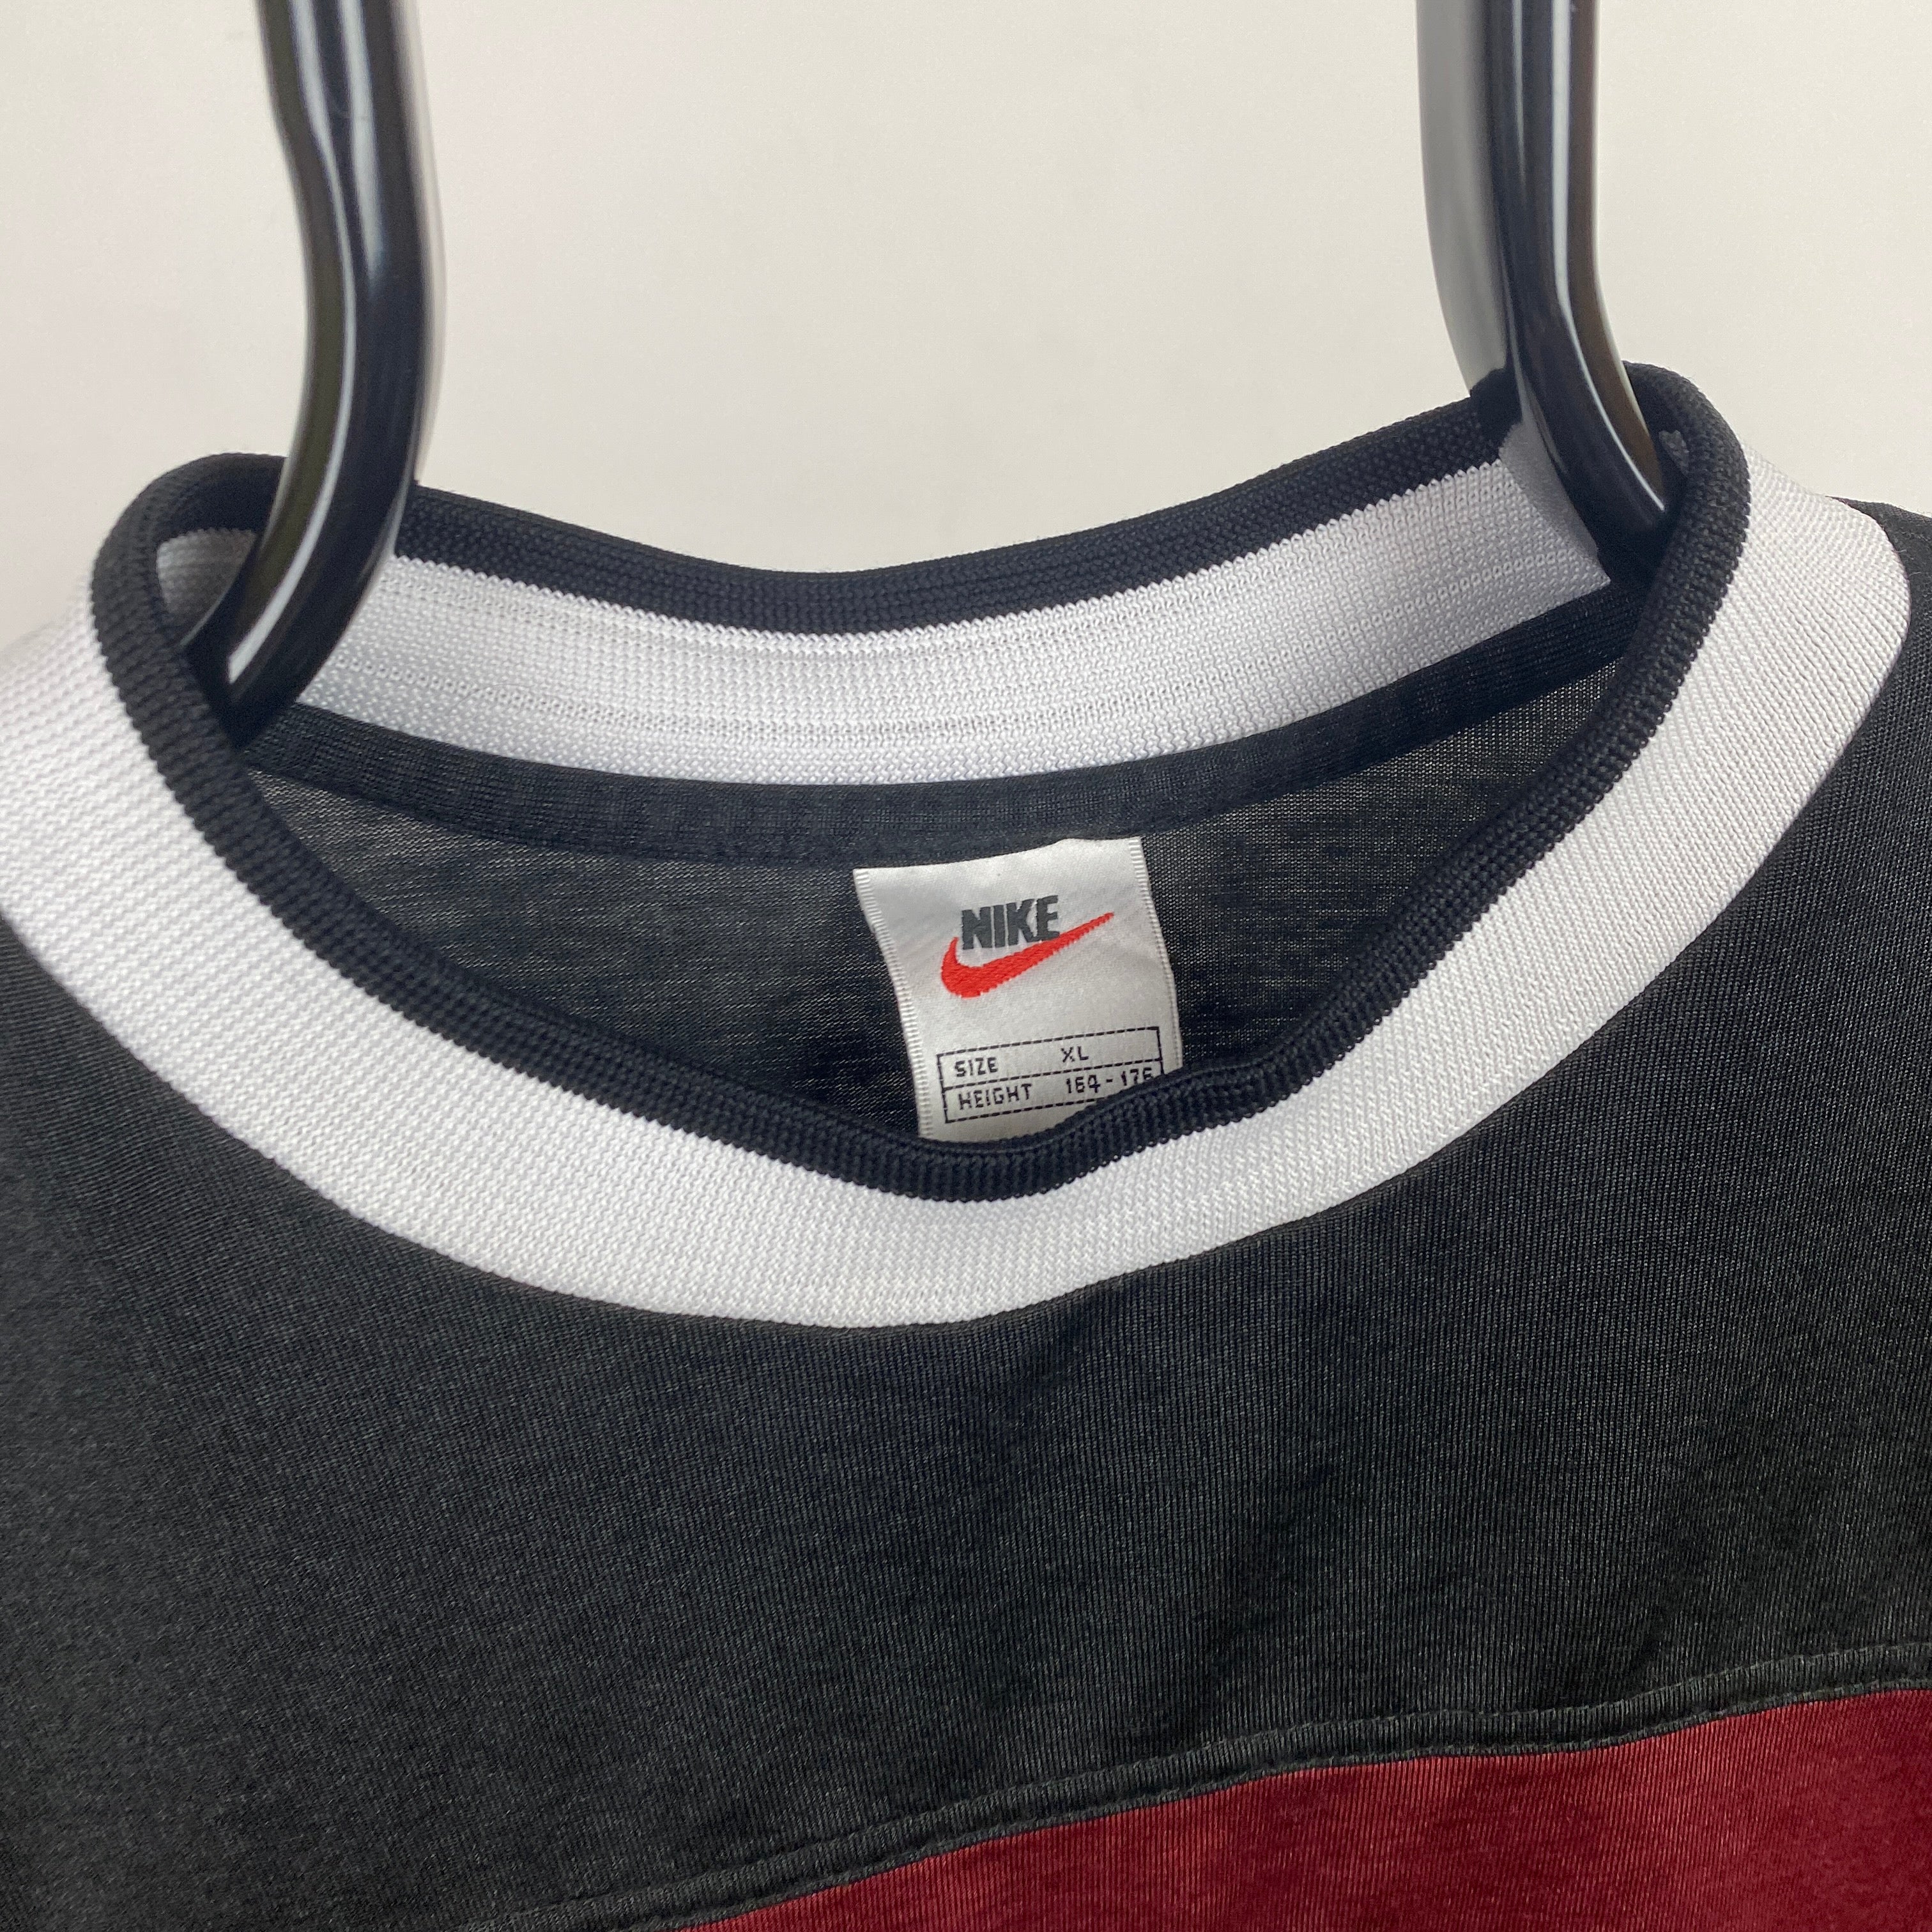 90s Nike T-Shirt Red Small